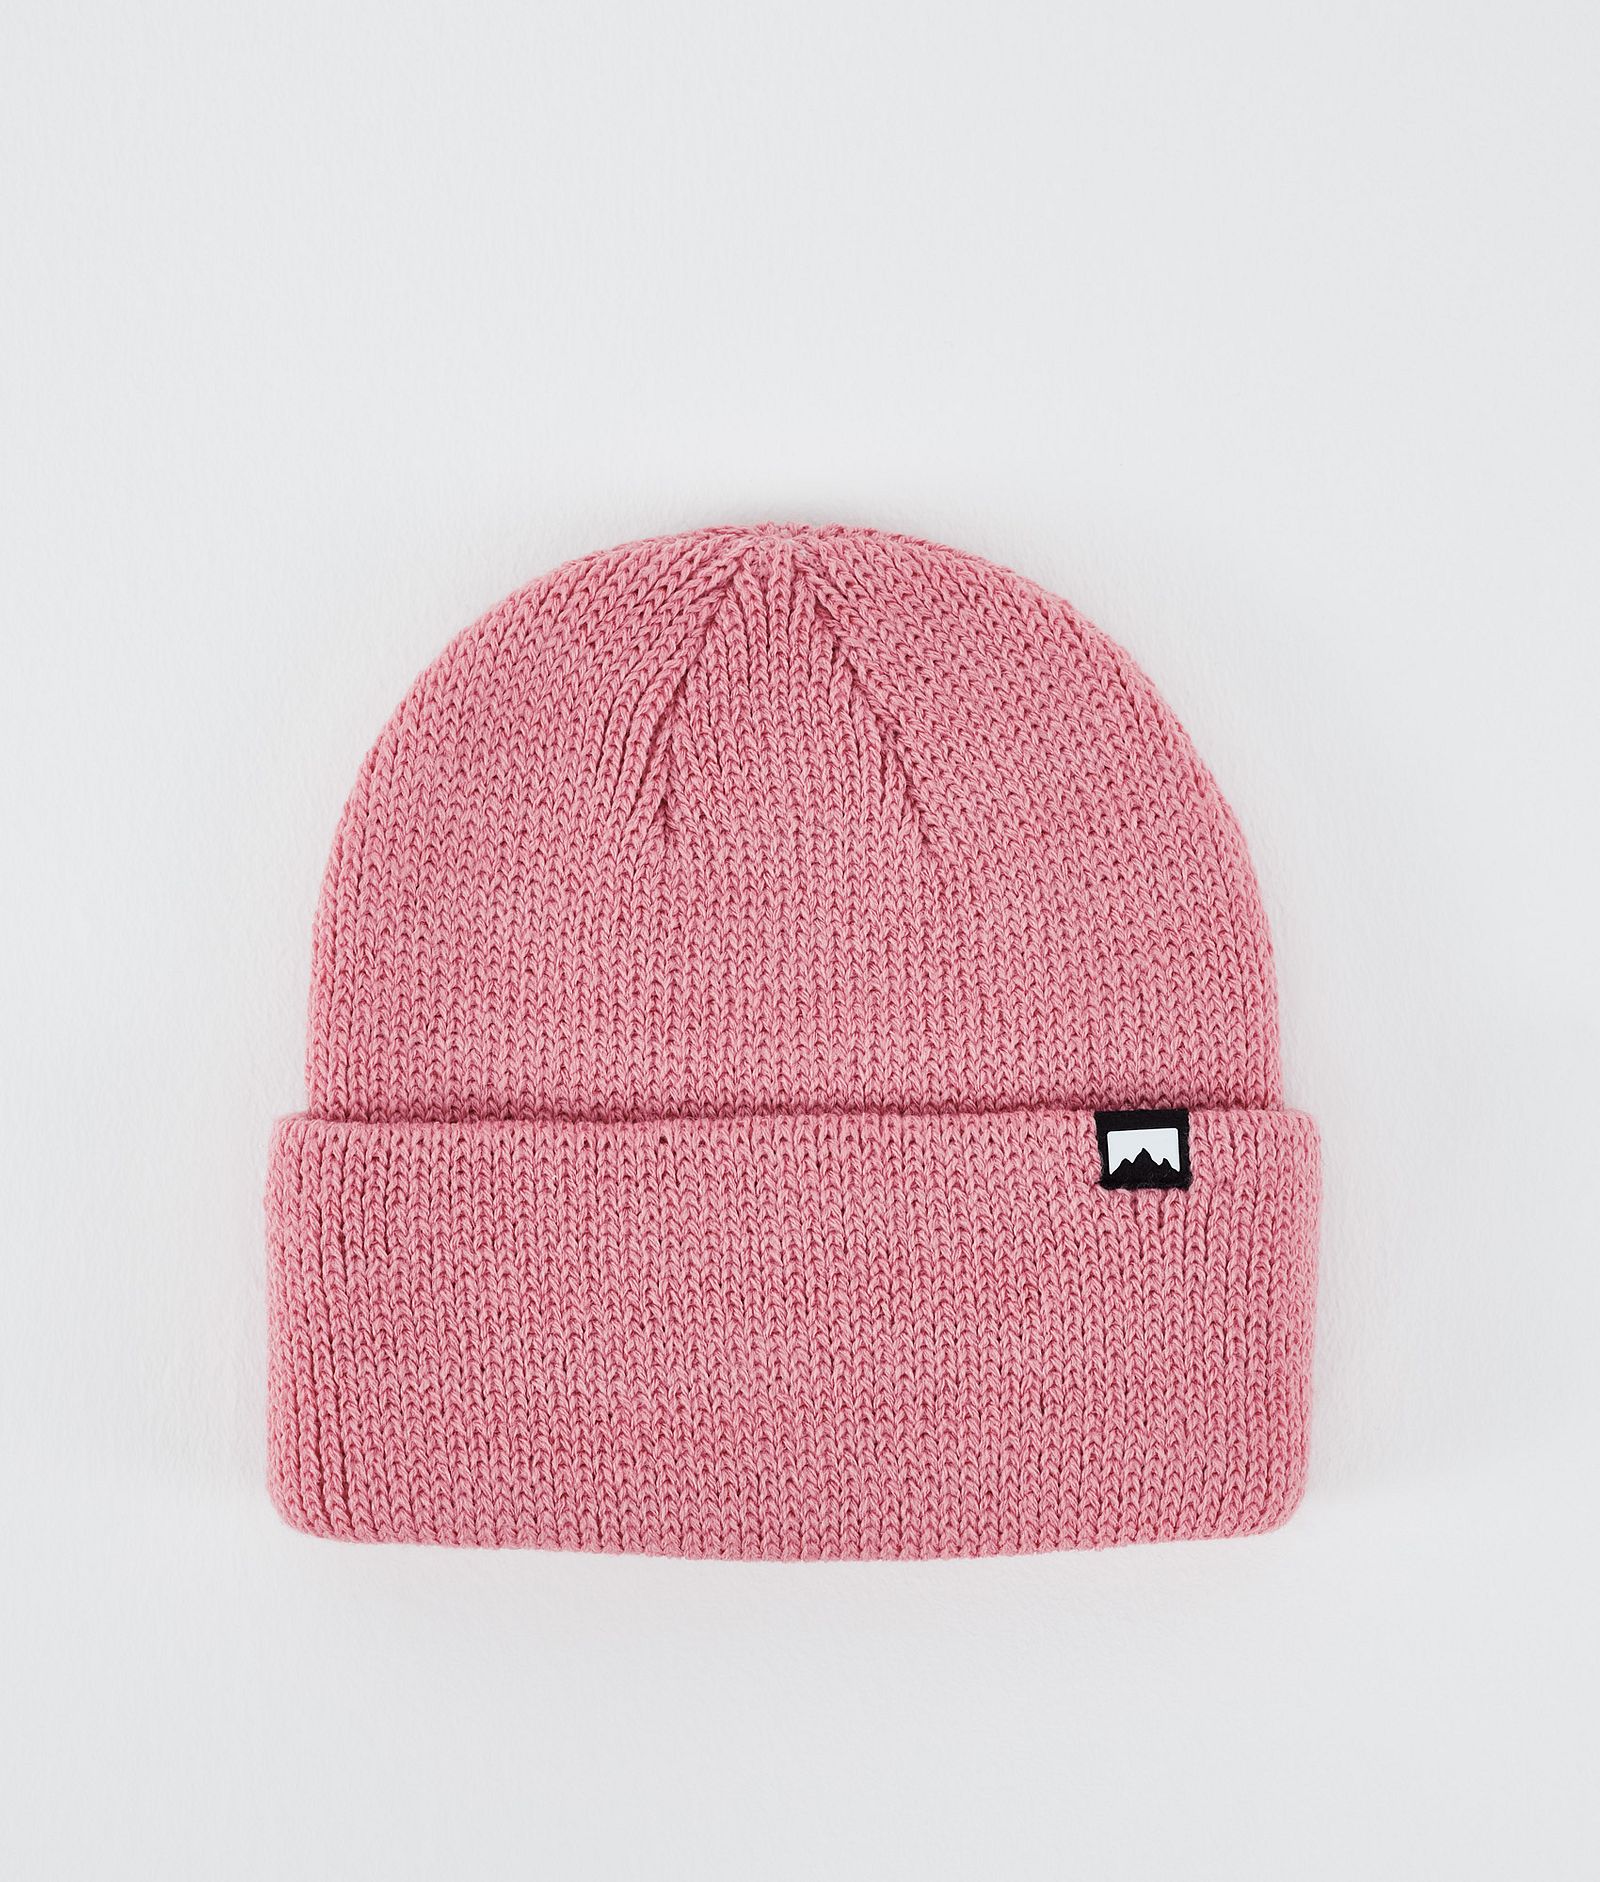 Ice Beanie Pink, Image 1 of 3